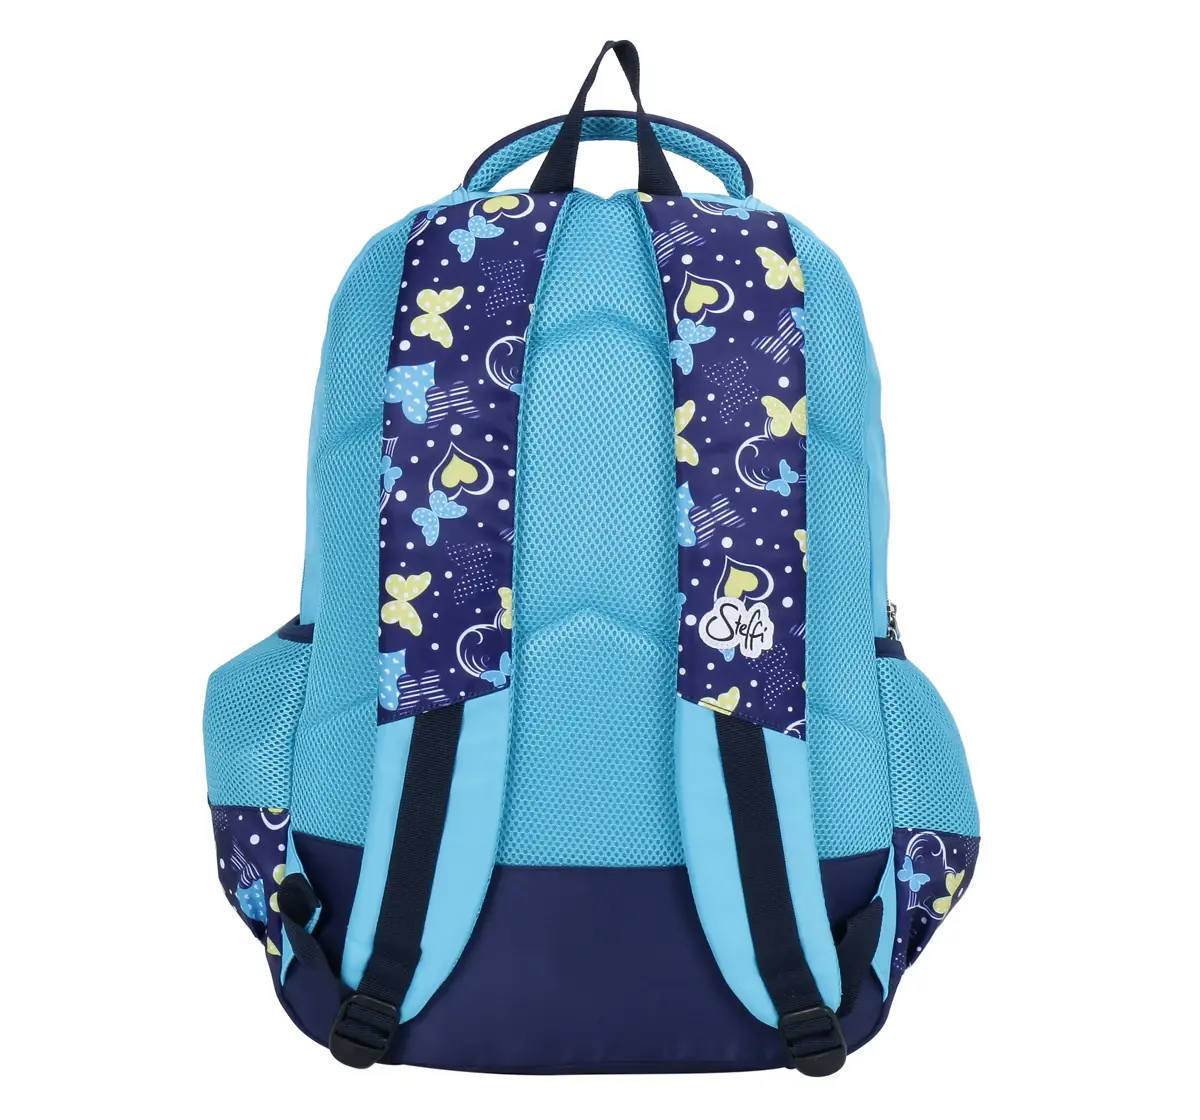 Simba Steffi Love Rising Sparkle 19 Backpack Multicolor 3Y+